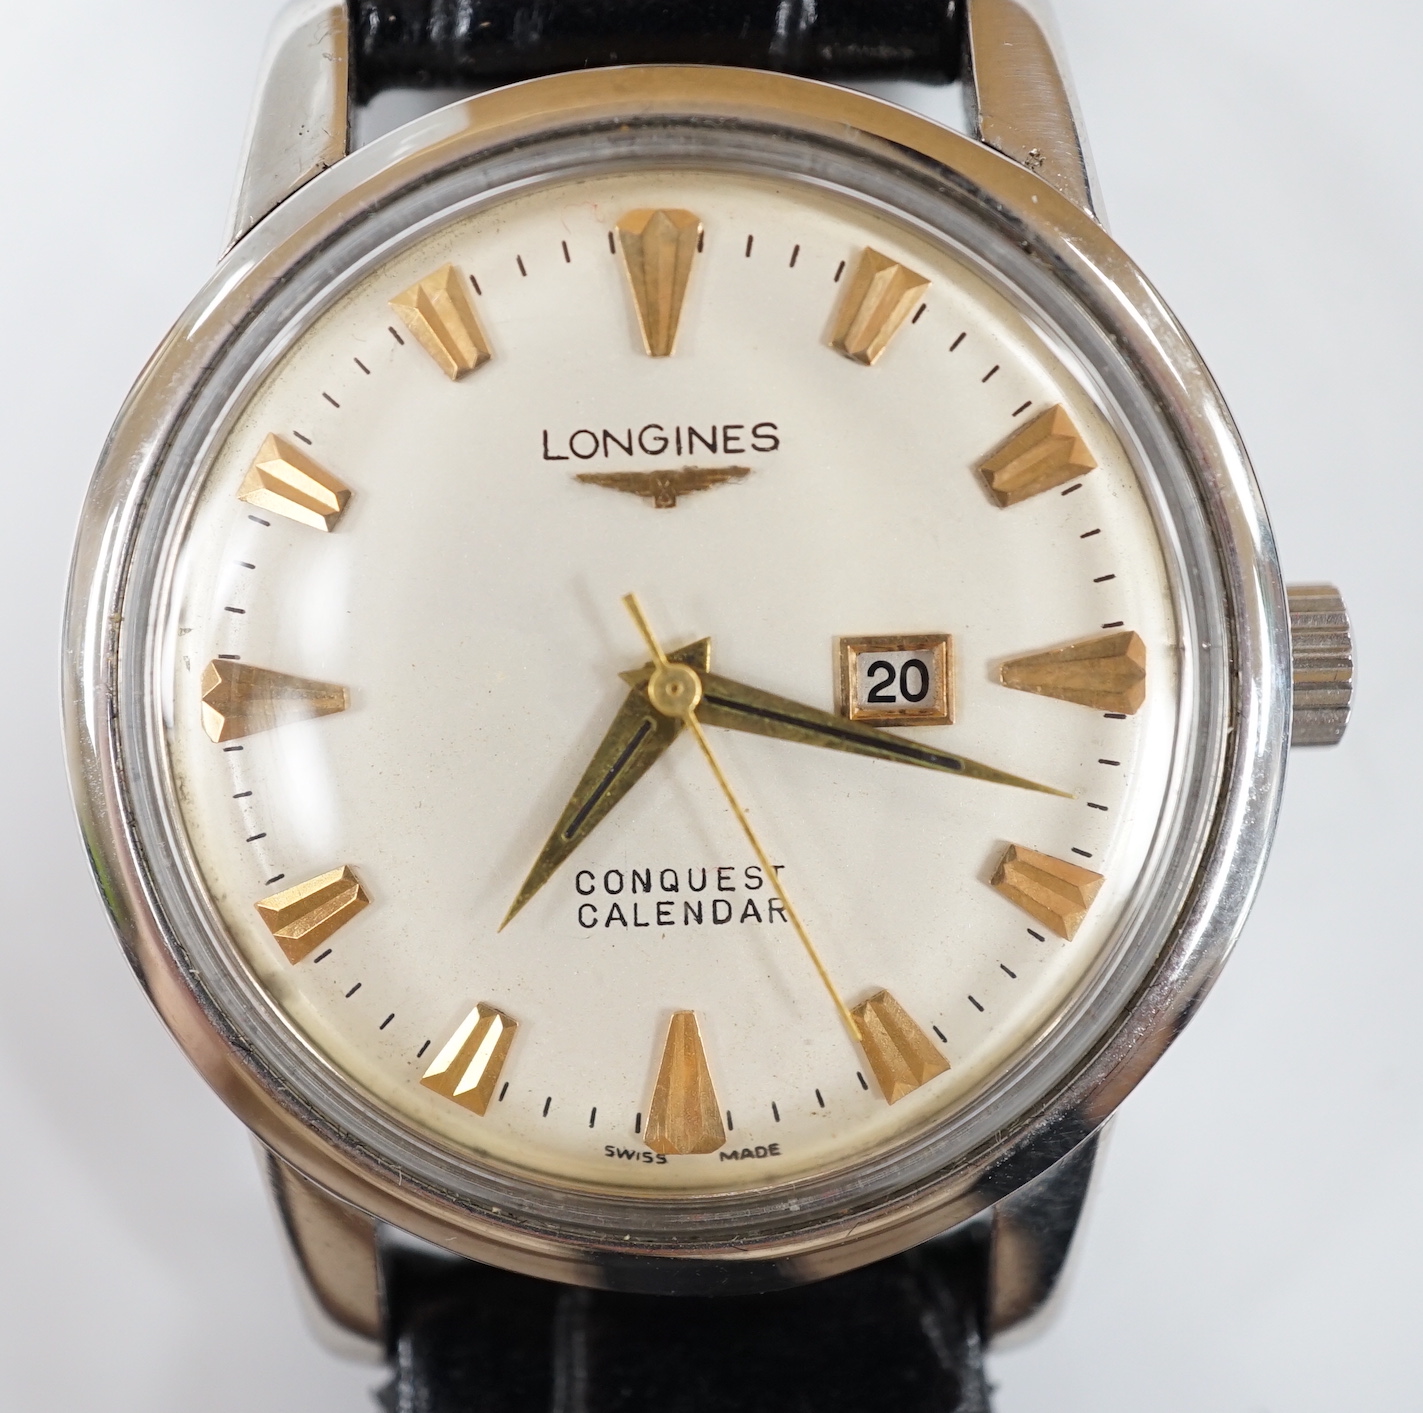 A gentleman's stainless steel Longines Conquest Calendar manual wind wrist watch, on Longines leather strap with Longines buckle, case diameter 35mm.